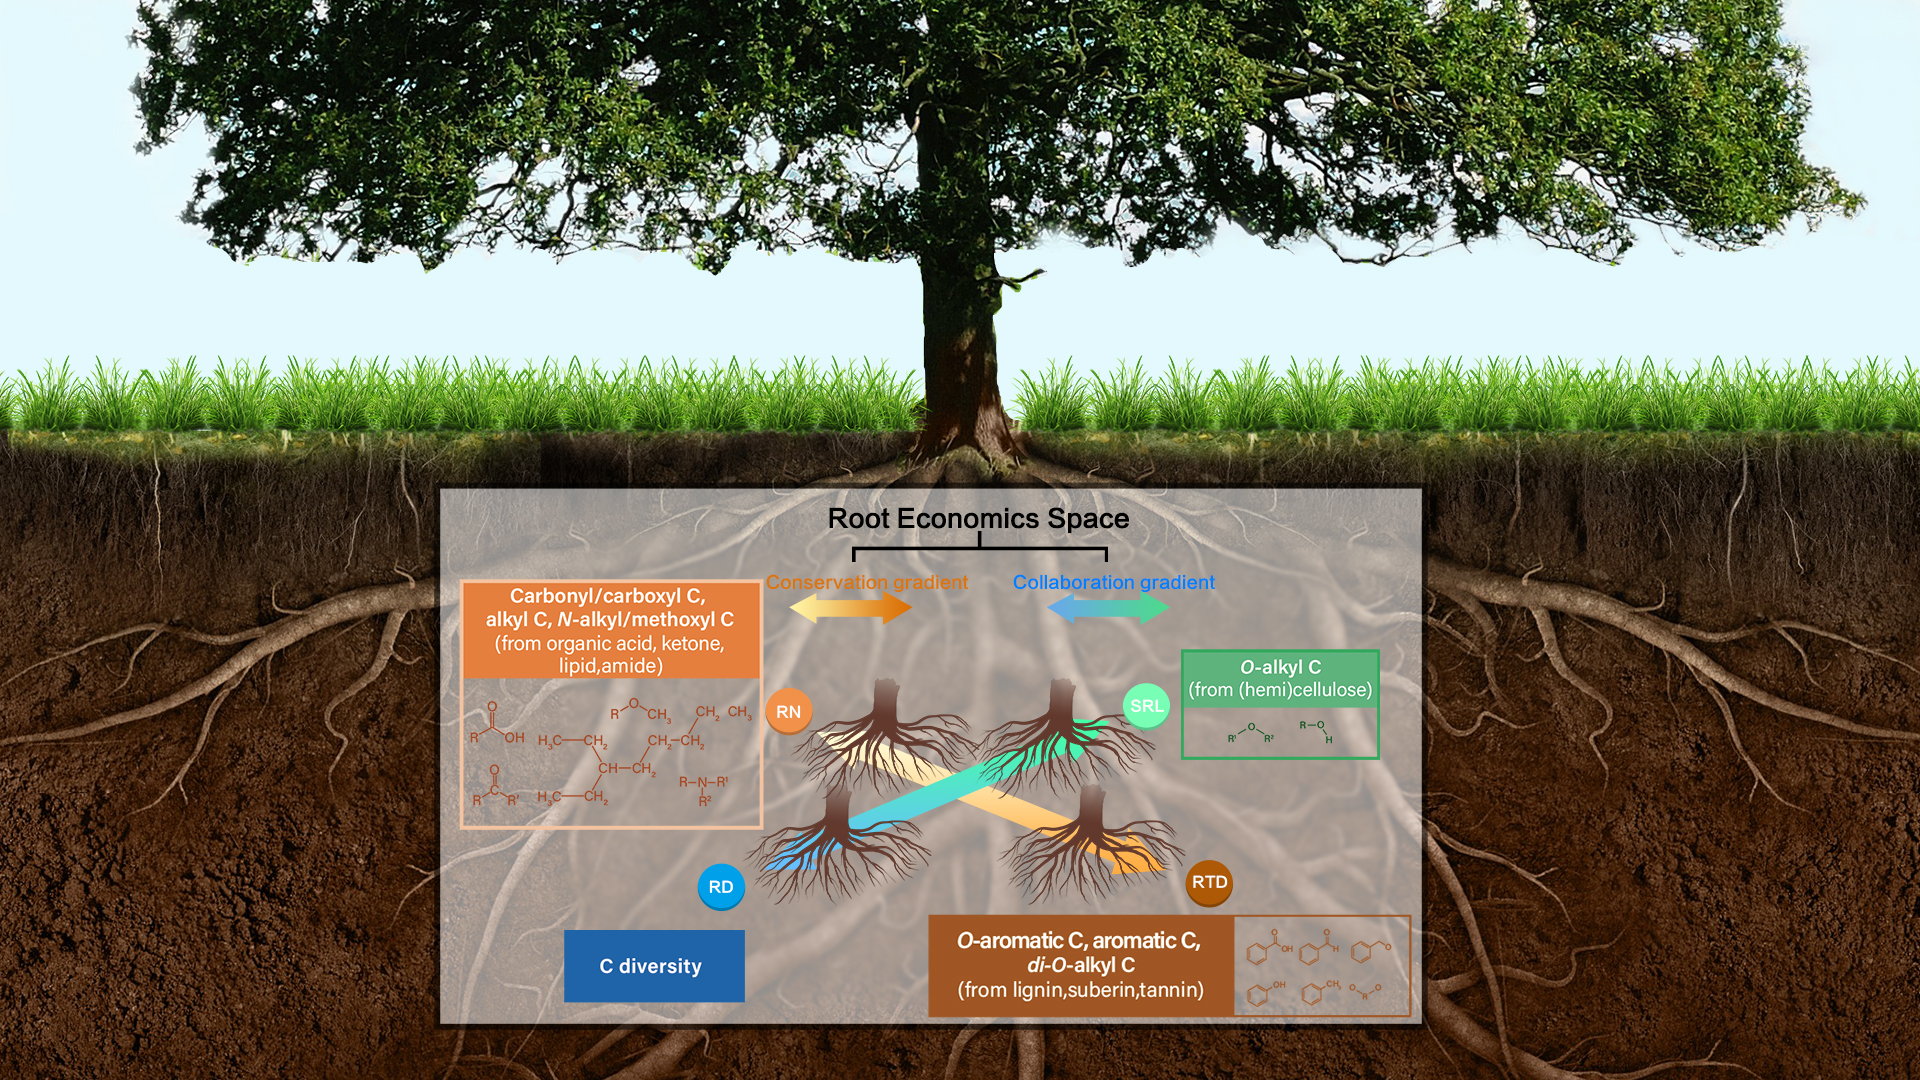 Researchers highlight molecular-level carbon traits underlying multidimensional fine-root economics space